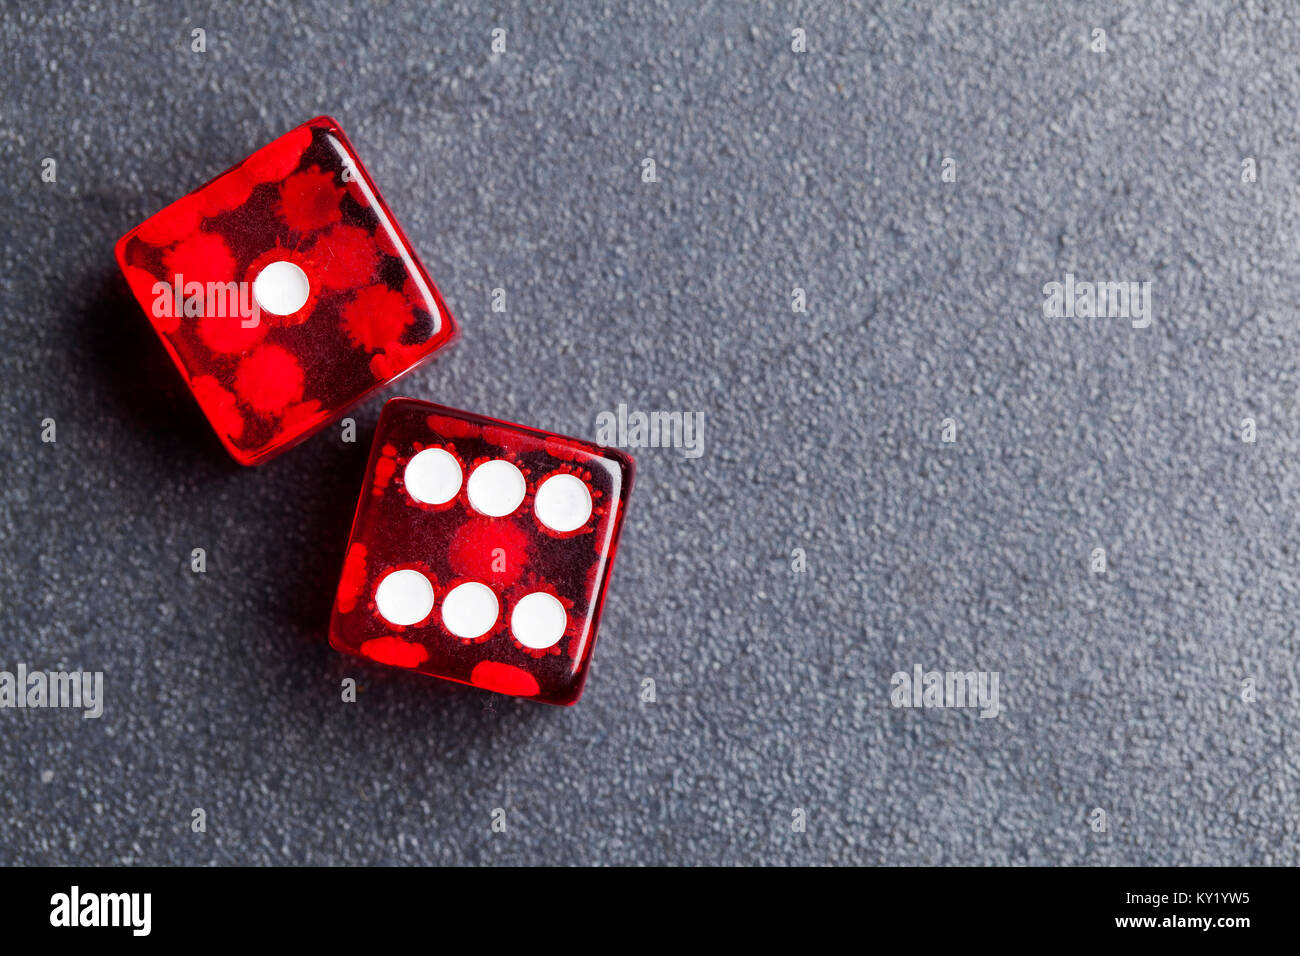 A set of red dice on a slate background. Betting and gambling concept Stock Photo